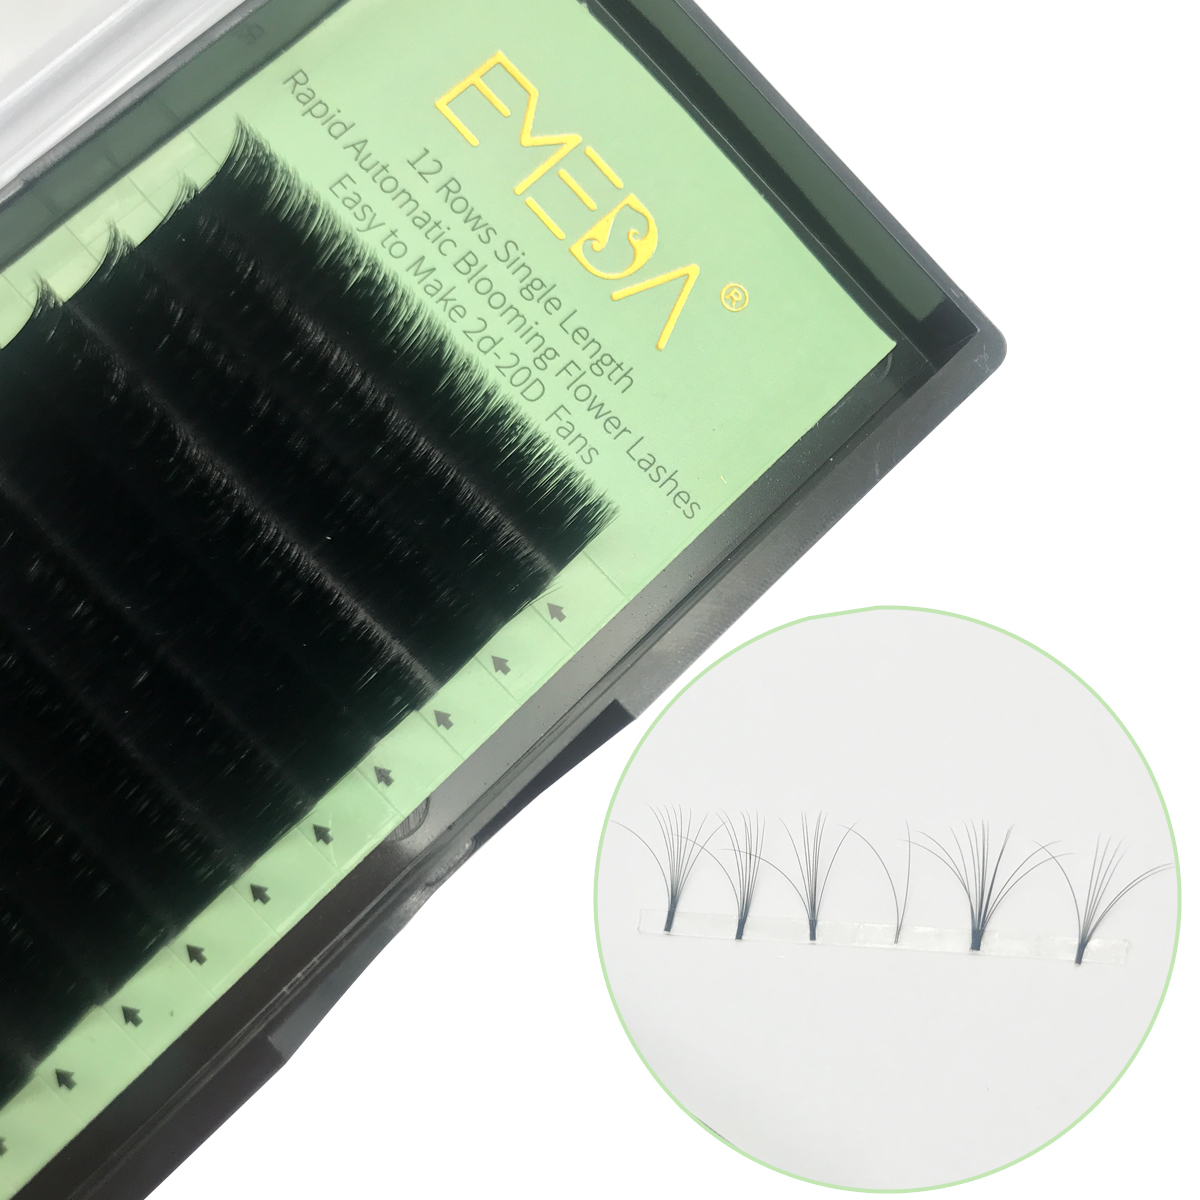 Inquiry for Hot selling Blooming lash extensions easy fan rapid to flower volume lash 0.03 0.05 0.07 C curl D curl  vendors with private label in US XJ66